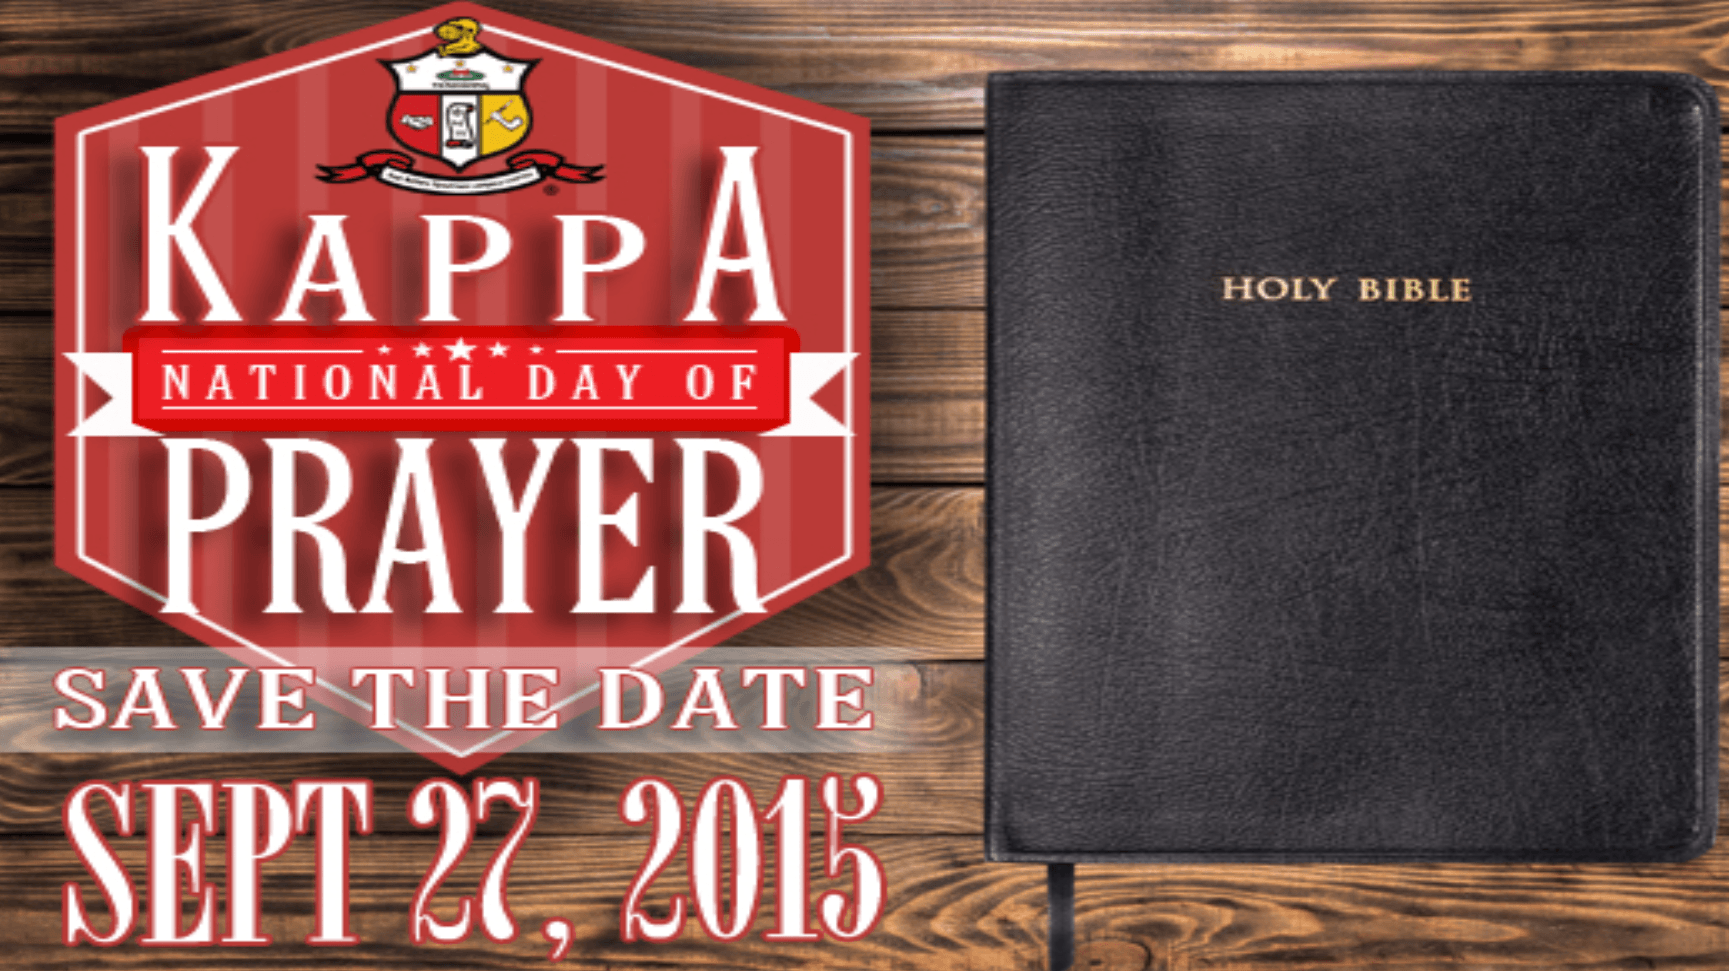 2015 National Day of Prayer Logo - Kappa National Day of Prayer. The East Central Province of Kappa